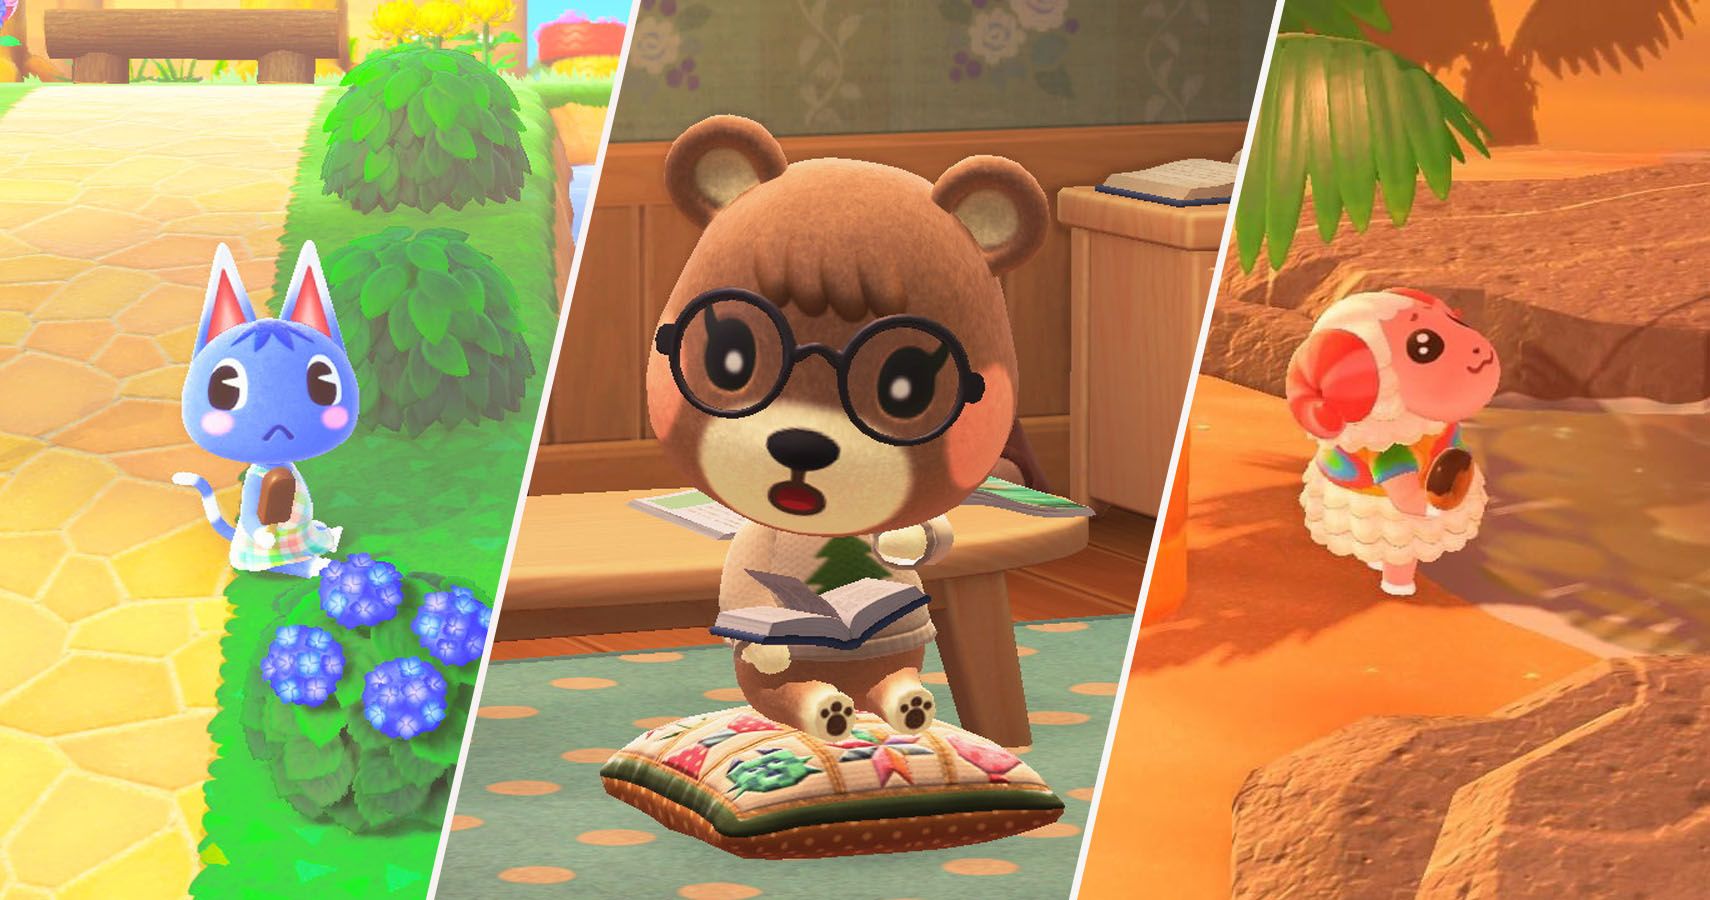 The 15 Cutest Villagers From Animal Crossing, Ranked | Game Rant